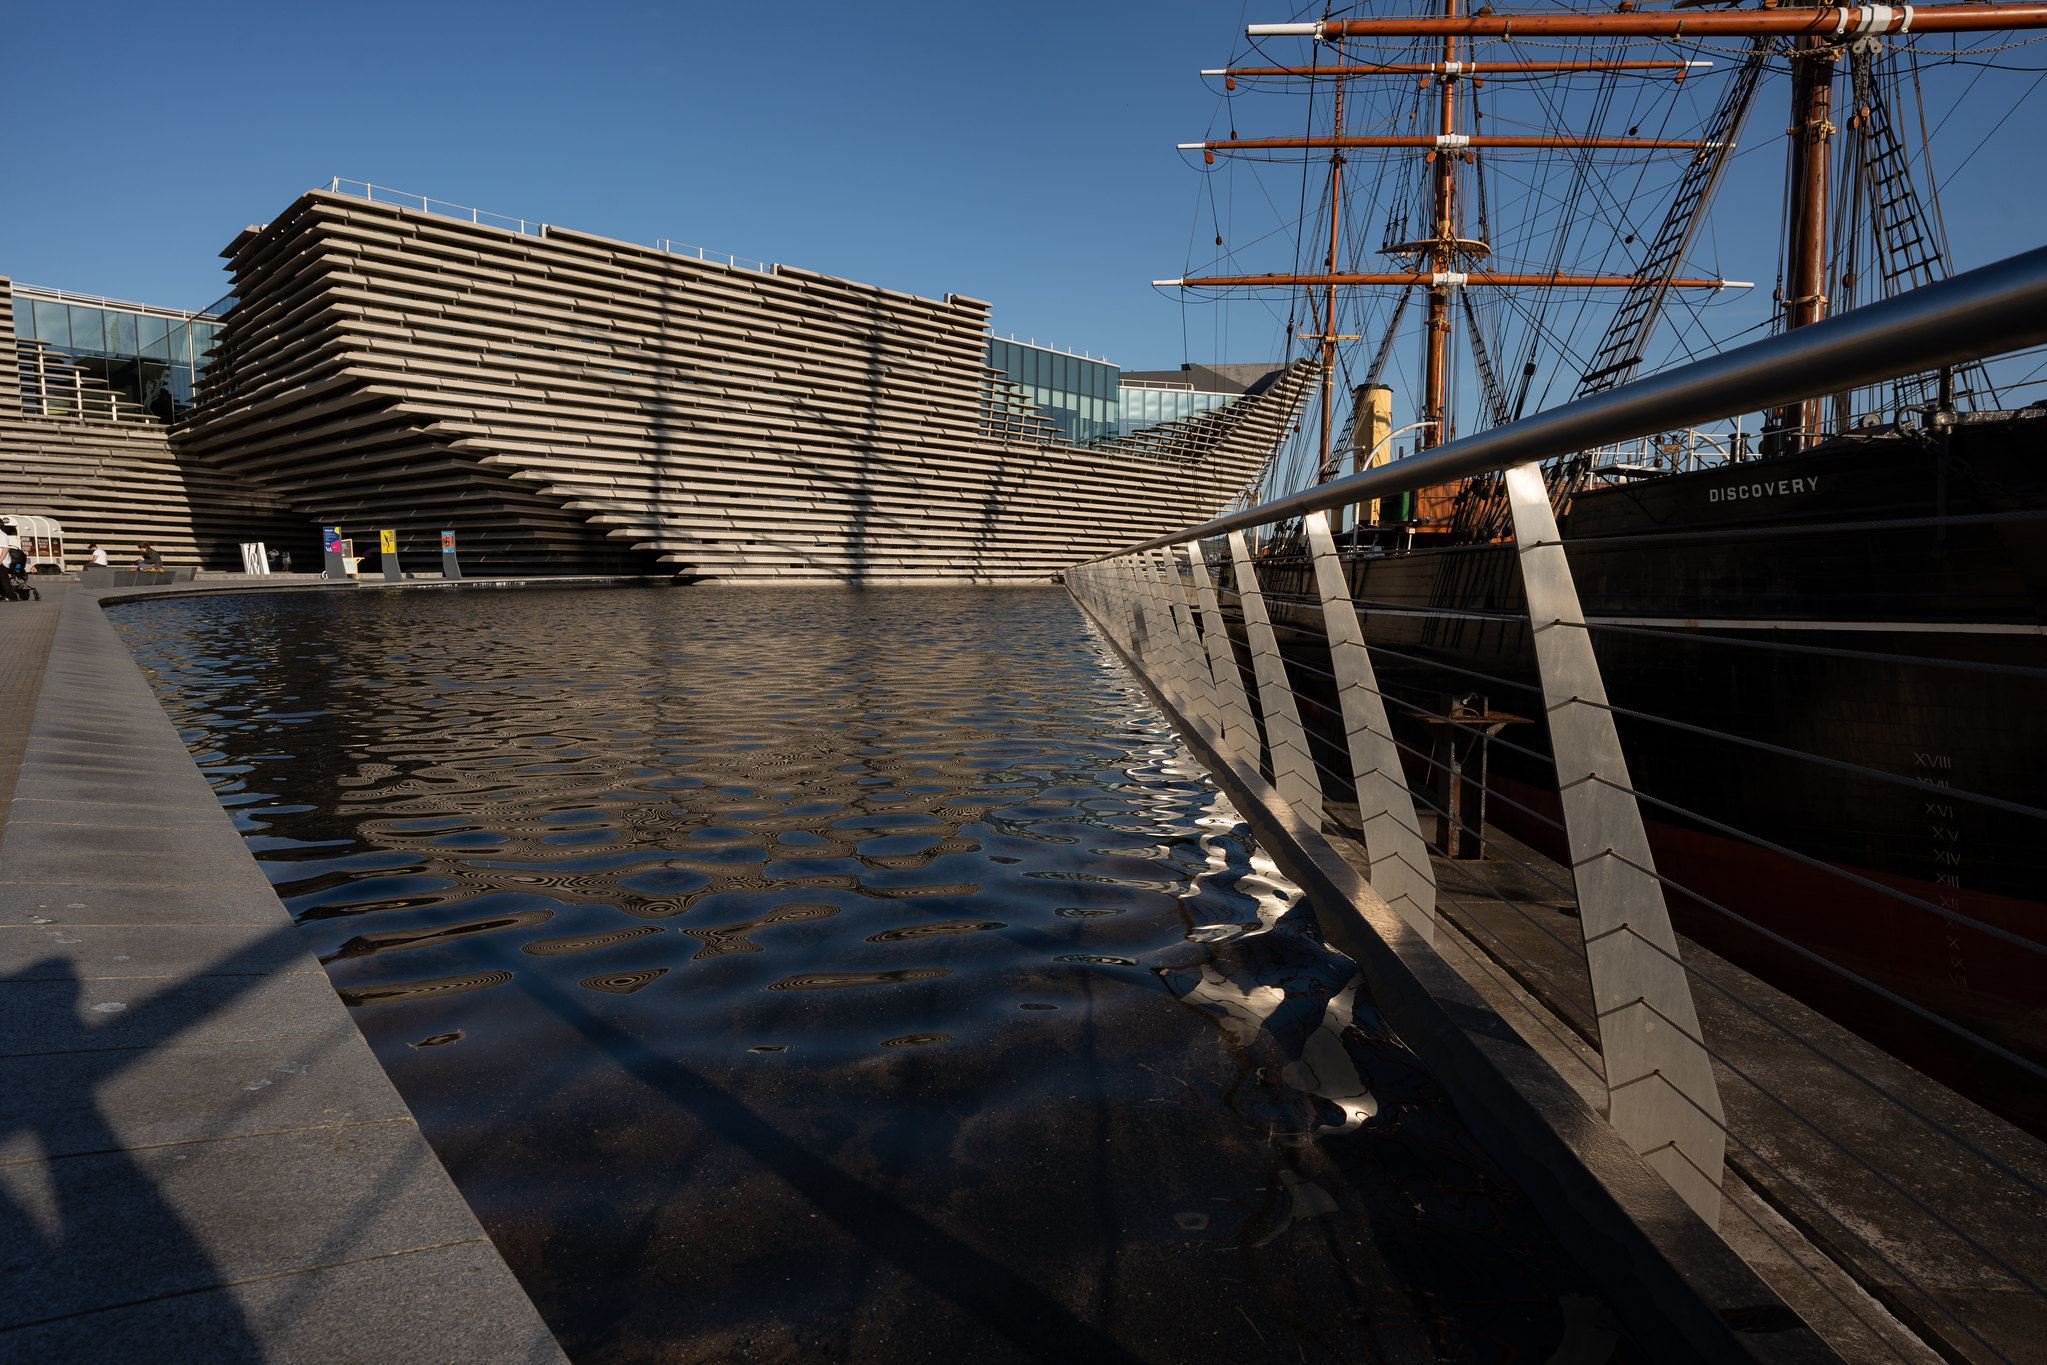 RRS Discovery and V&A, Dundee